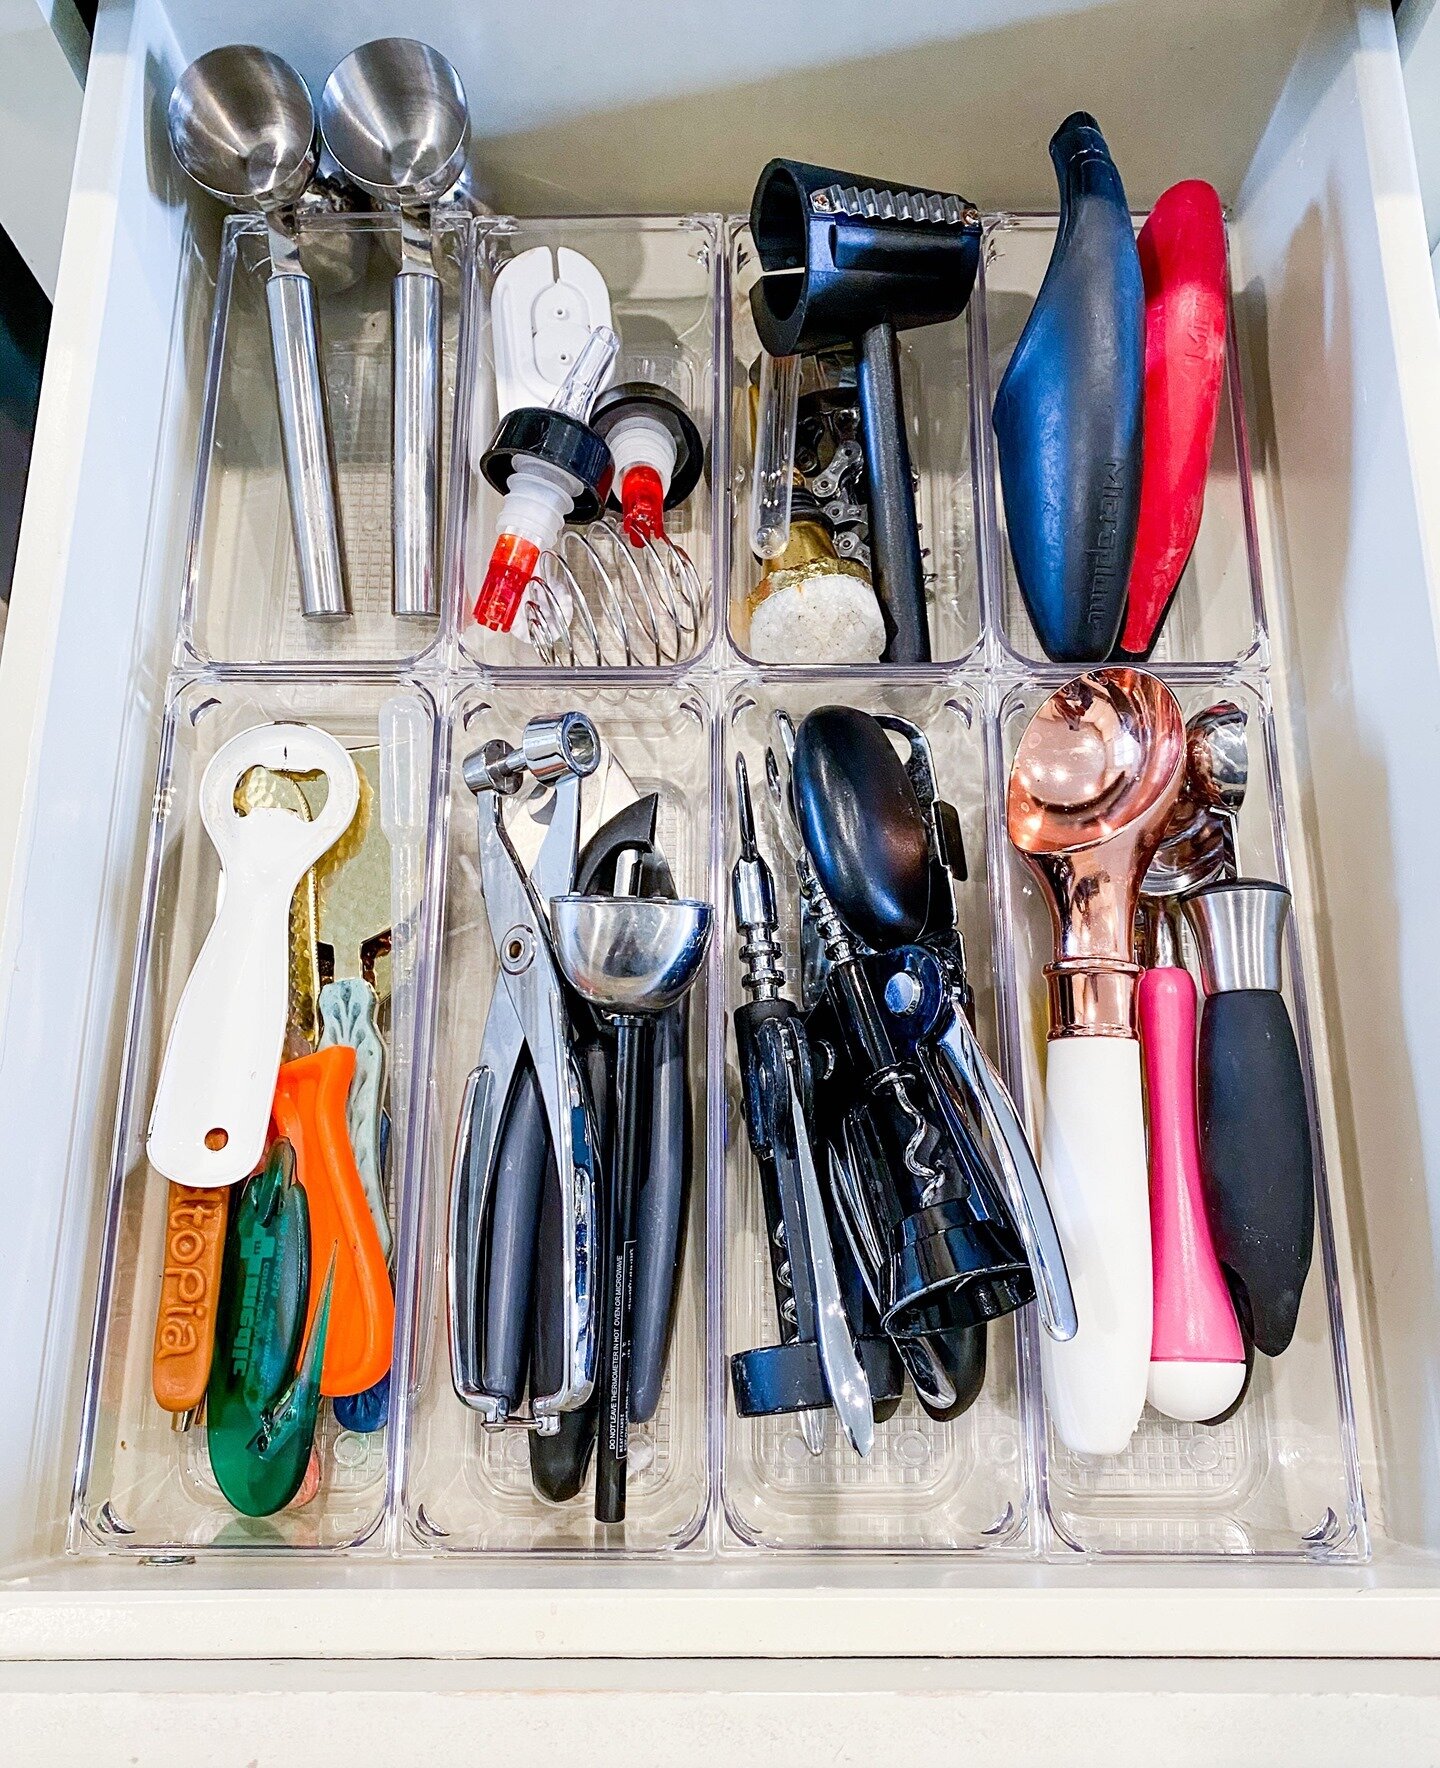 When your kitchen small gadgets drawer is organized, when cooking you can find whatever you need in seconds. Gone are the days wasting time looking for anything in the kitchen. 
.
.
.
.
.
#drawerorganozation #gettingorganized #organizedhome #tidy #or